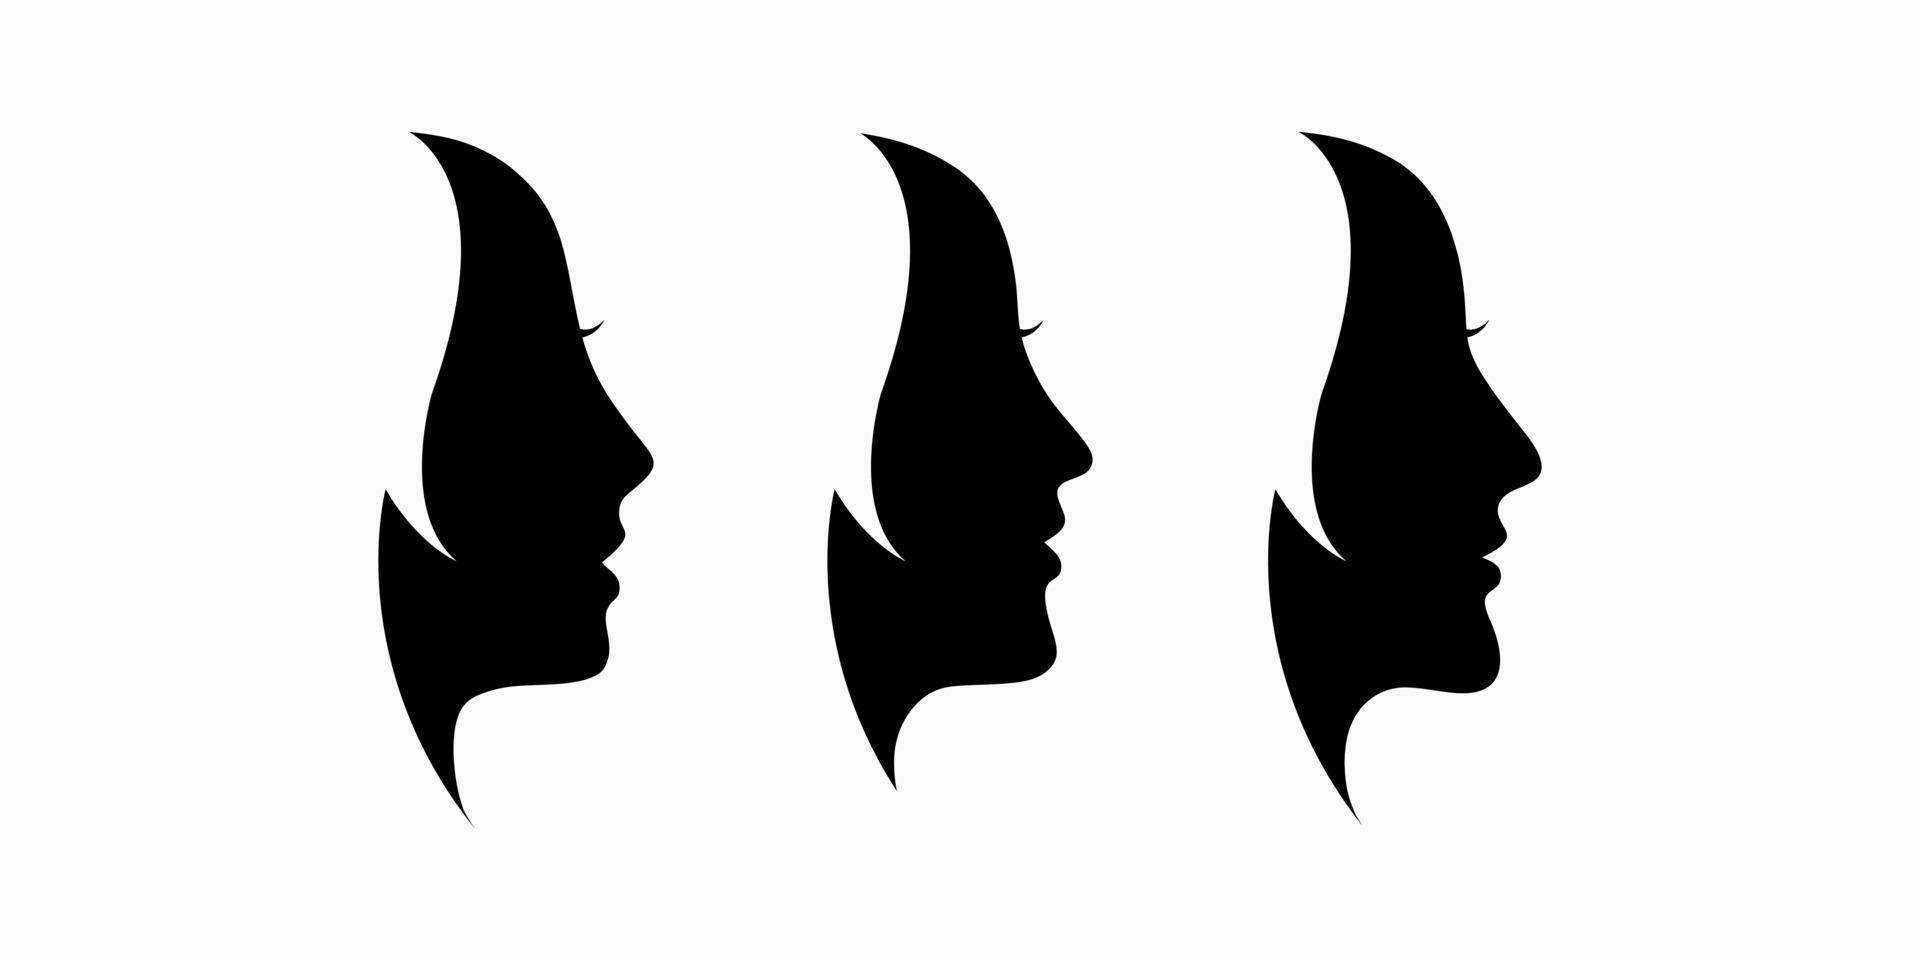 A collection of silhouettes of women's faces from the side in different faces. vector